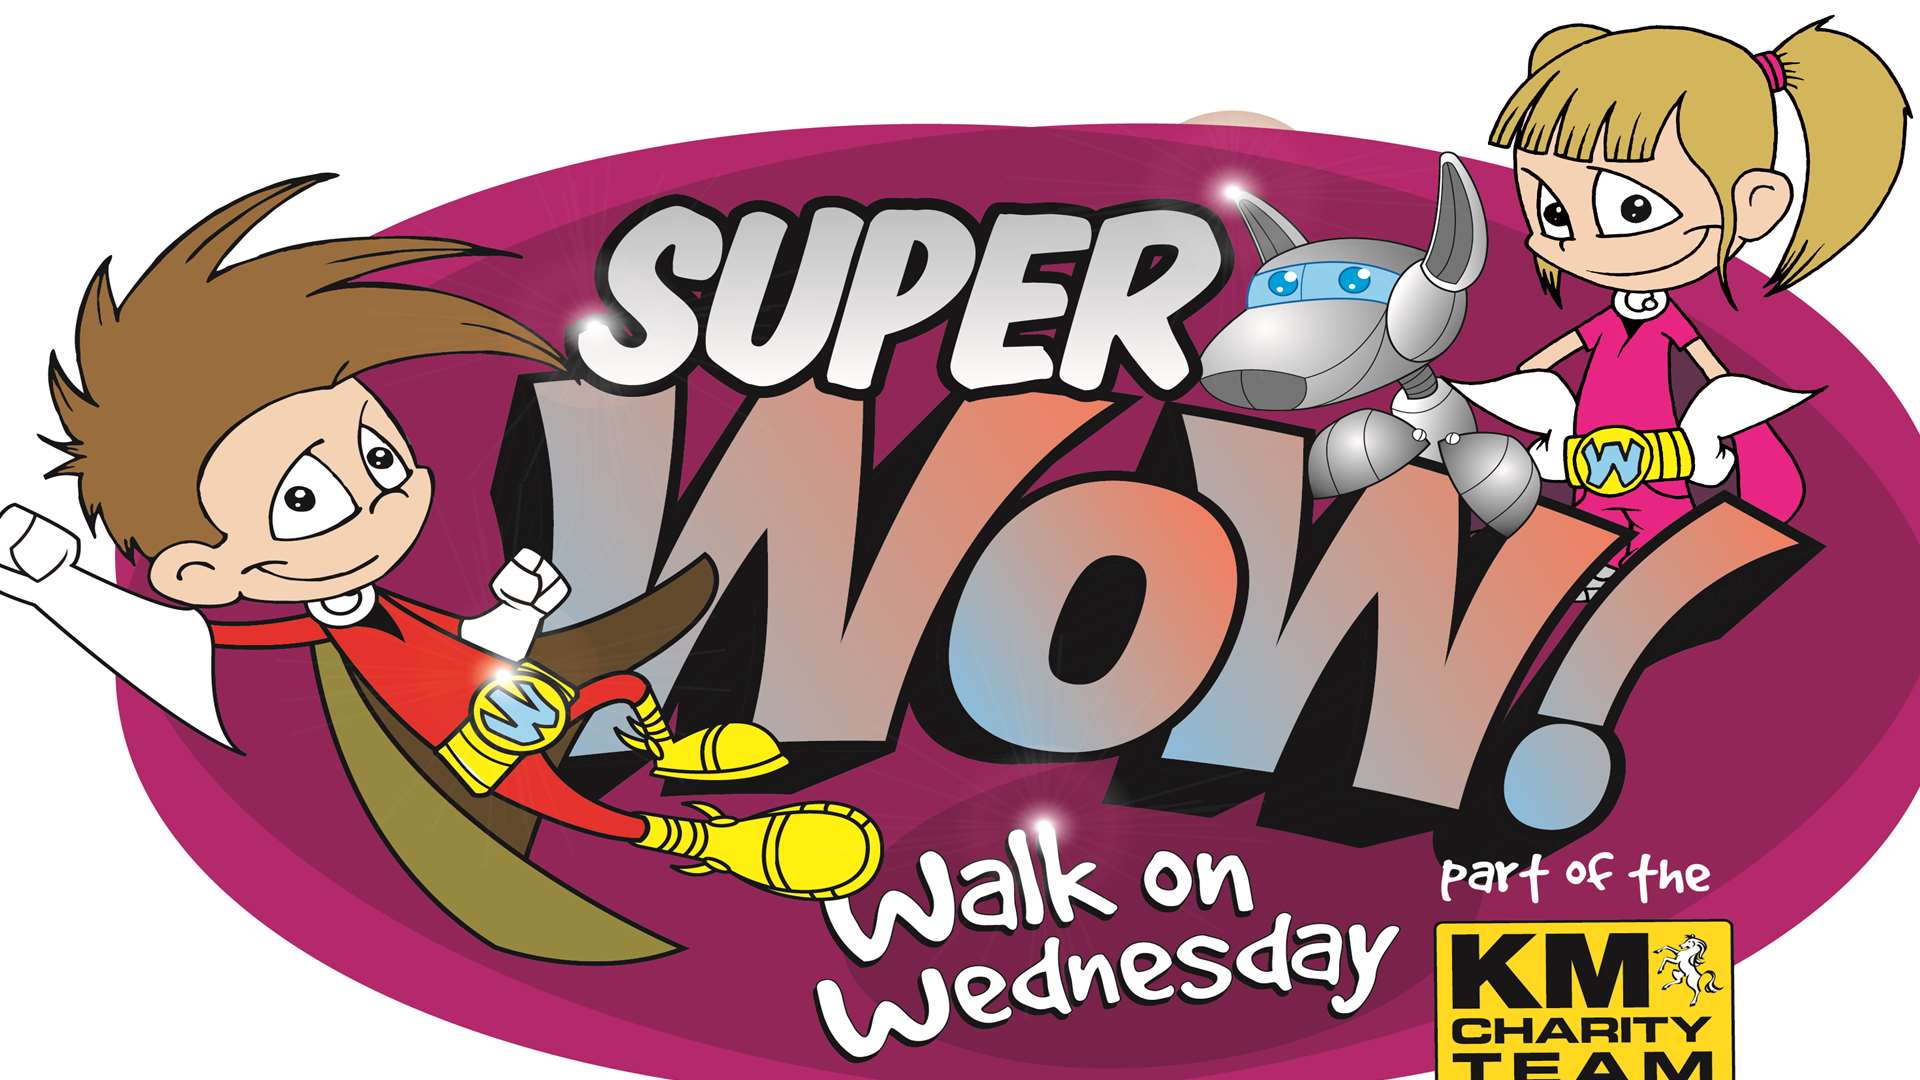 Super WoW! is the new green travel scheme from the KM Charity Team which incorporates the best elements of Walk on Wednesday (WoW) and Active Bug